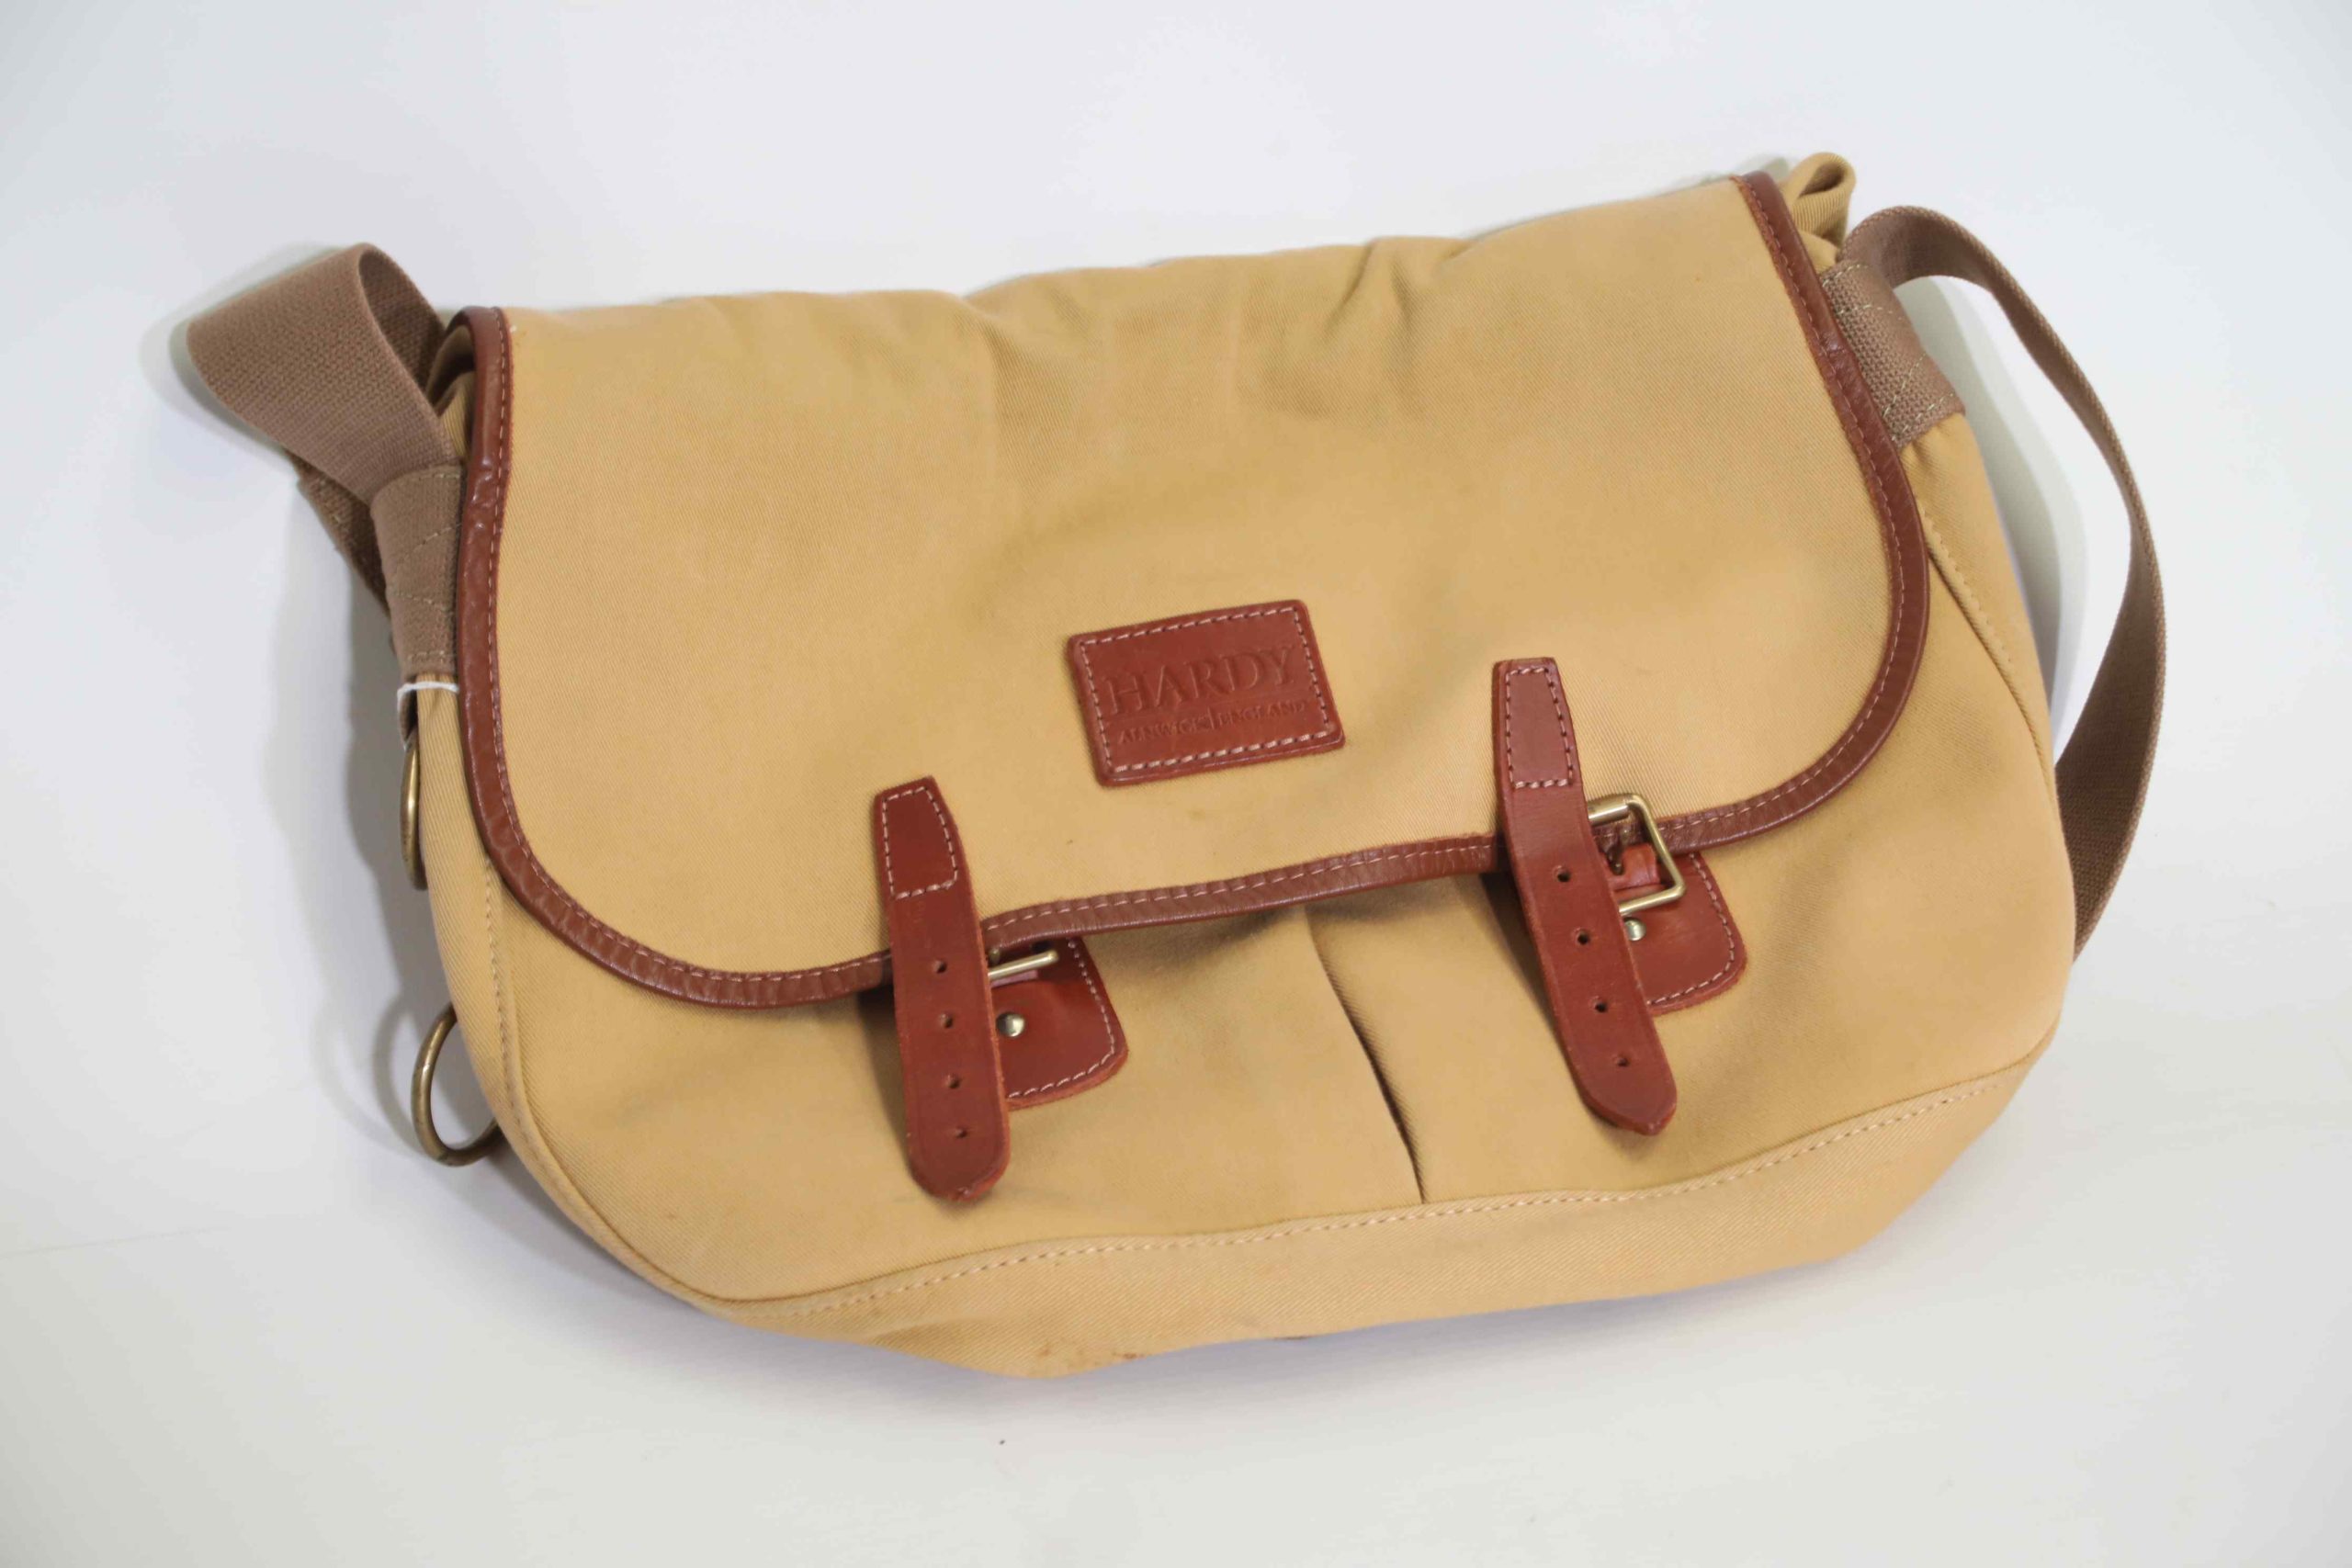 Lot 258: House of Hardy HBX Classic tackle bag